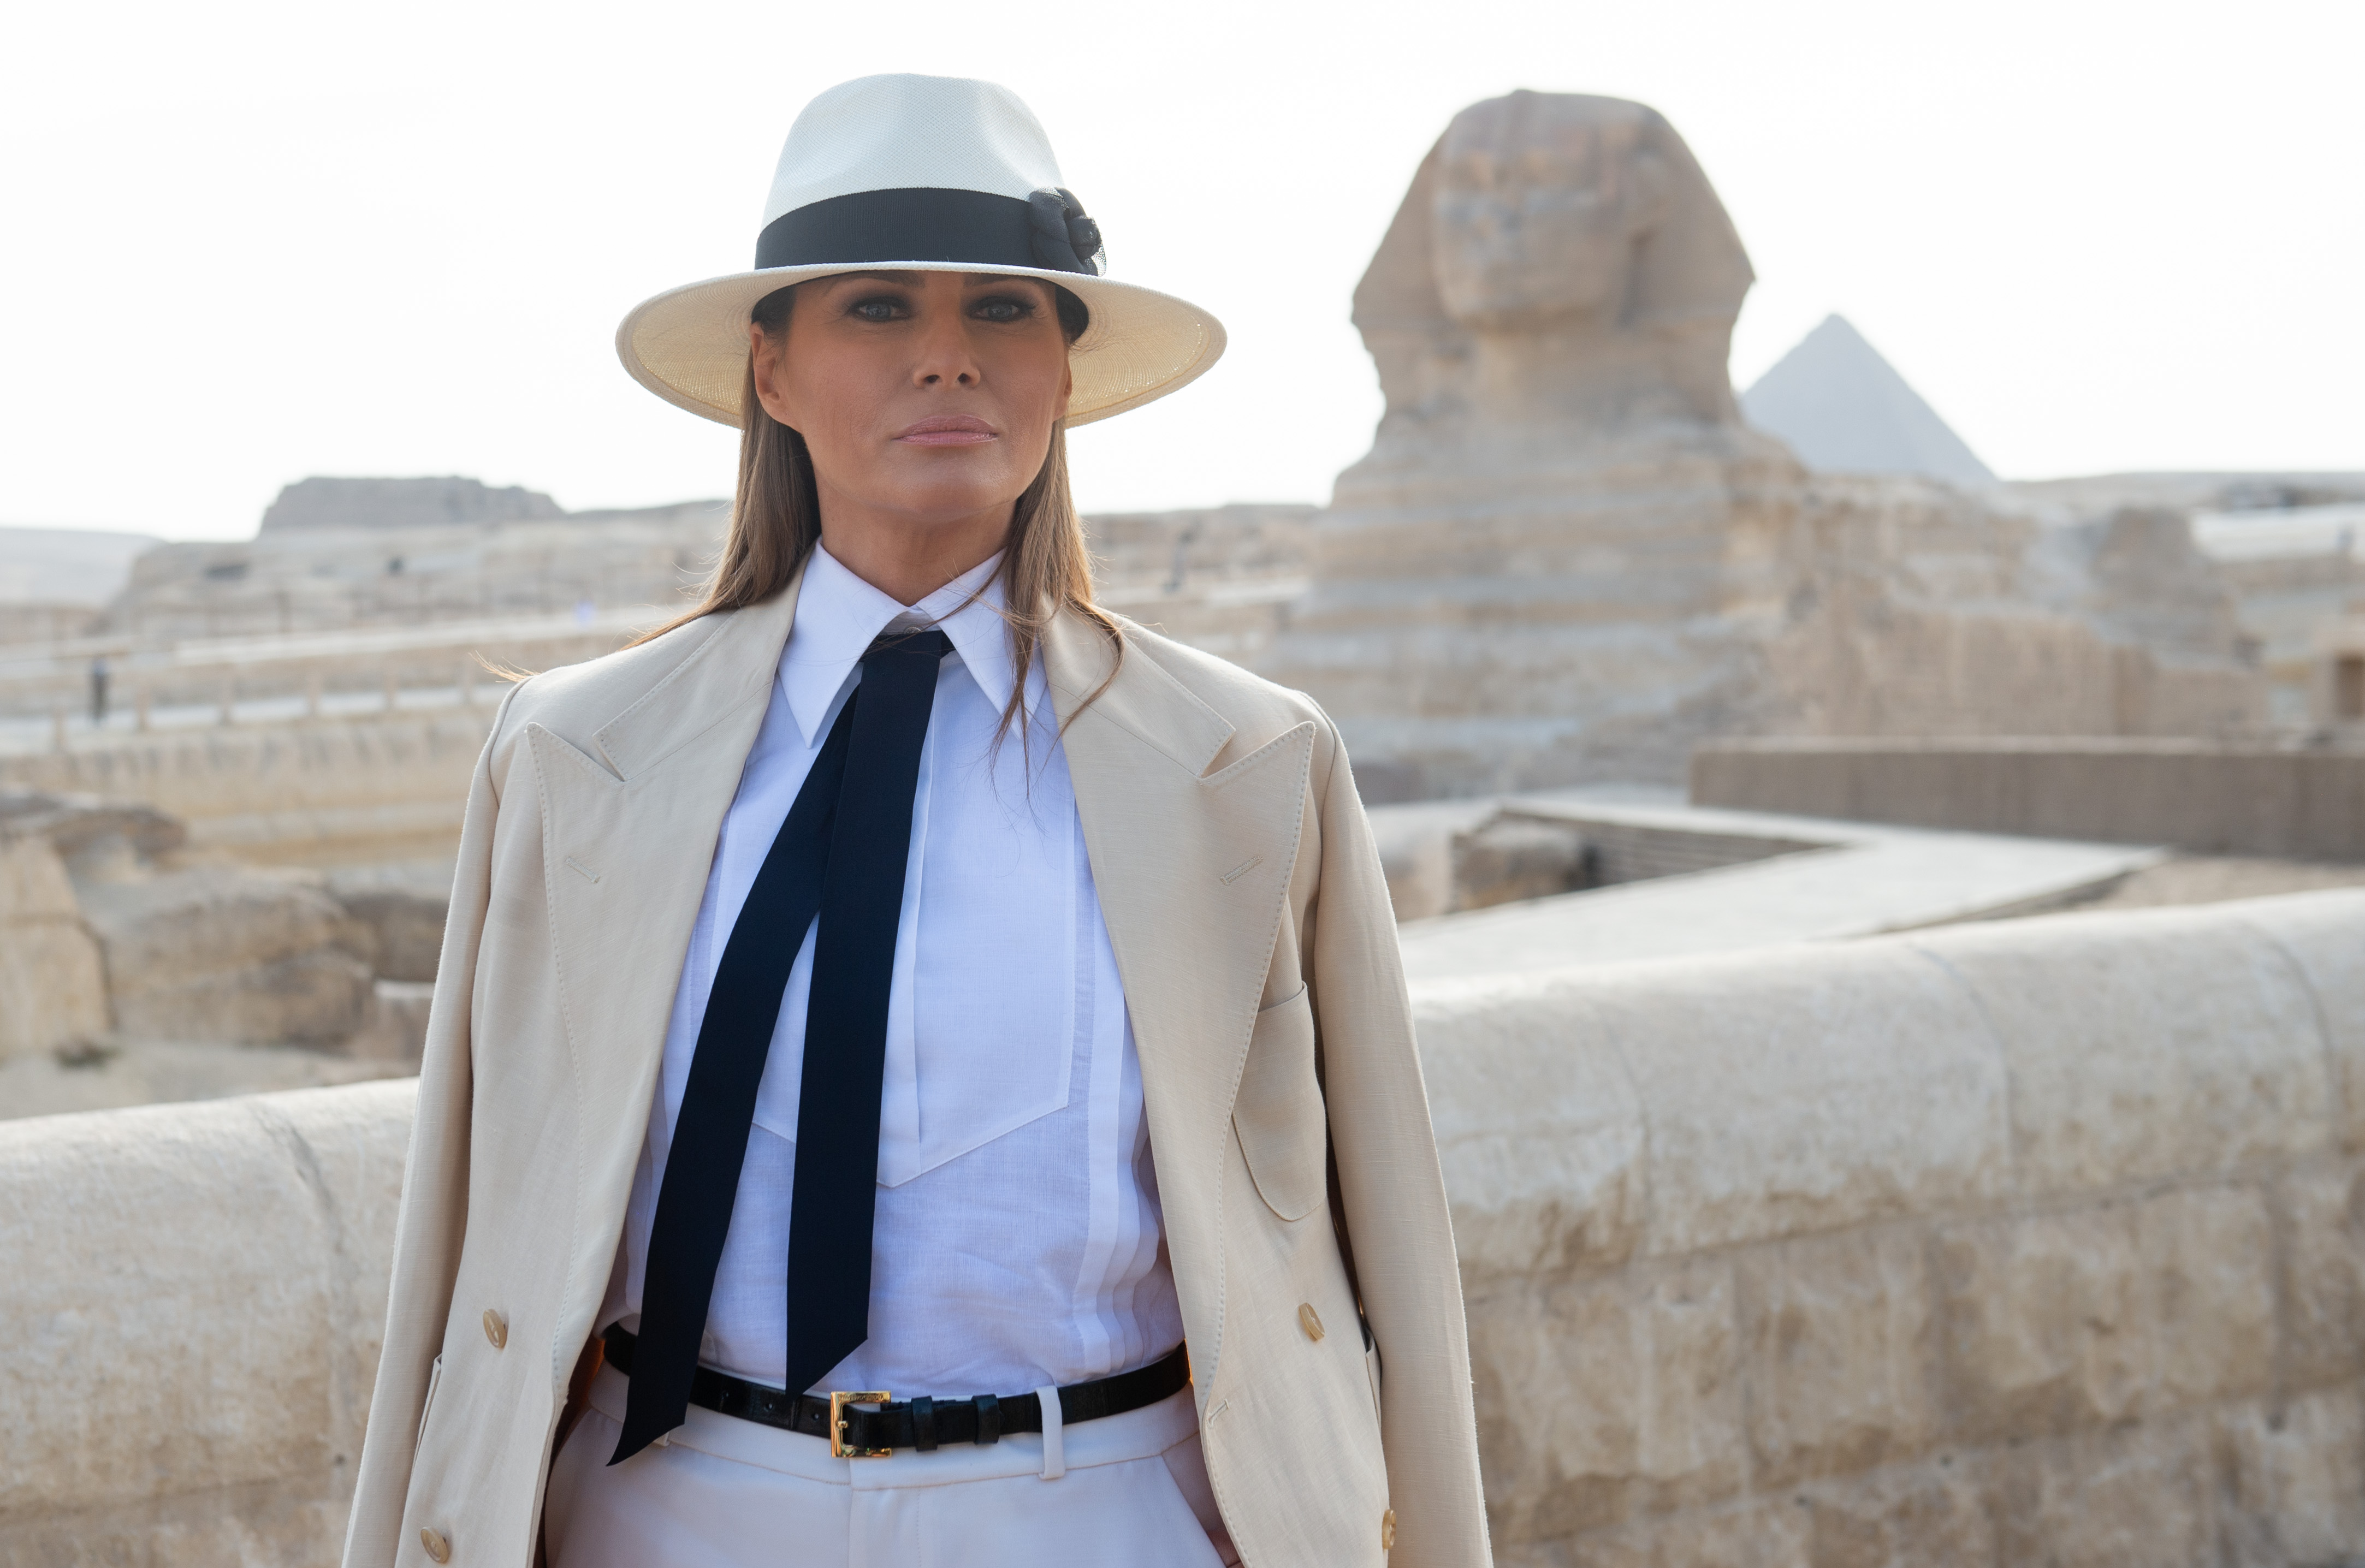 US First Lady Melania Trump tours the Egyptian pyramids and Sphinx in Giza, Egypt, October 6, 2018, the final stop on her 4-country tour through Africa. (Photo by SAUL LOEB / AFP) (Photo credit should read SAUL LOEB/AFP/Getty Images)